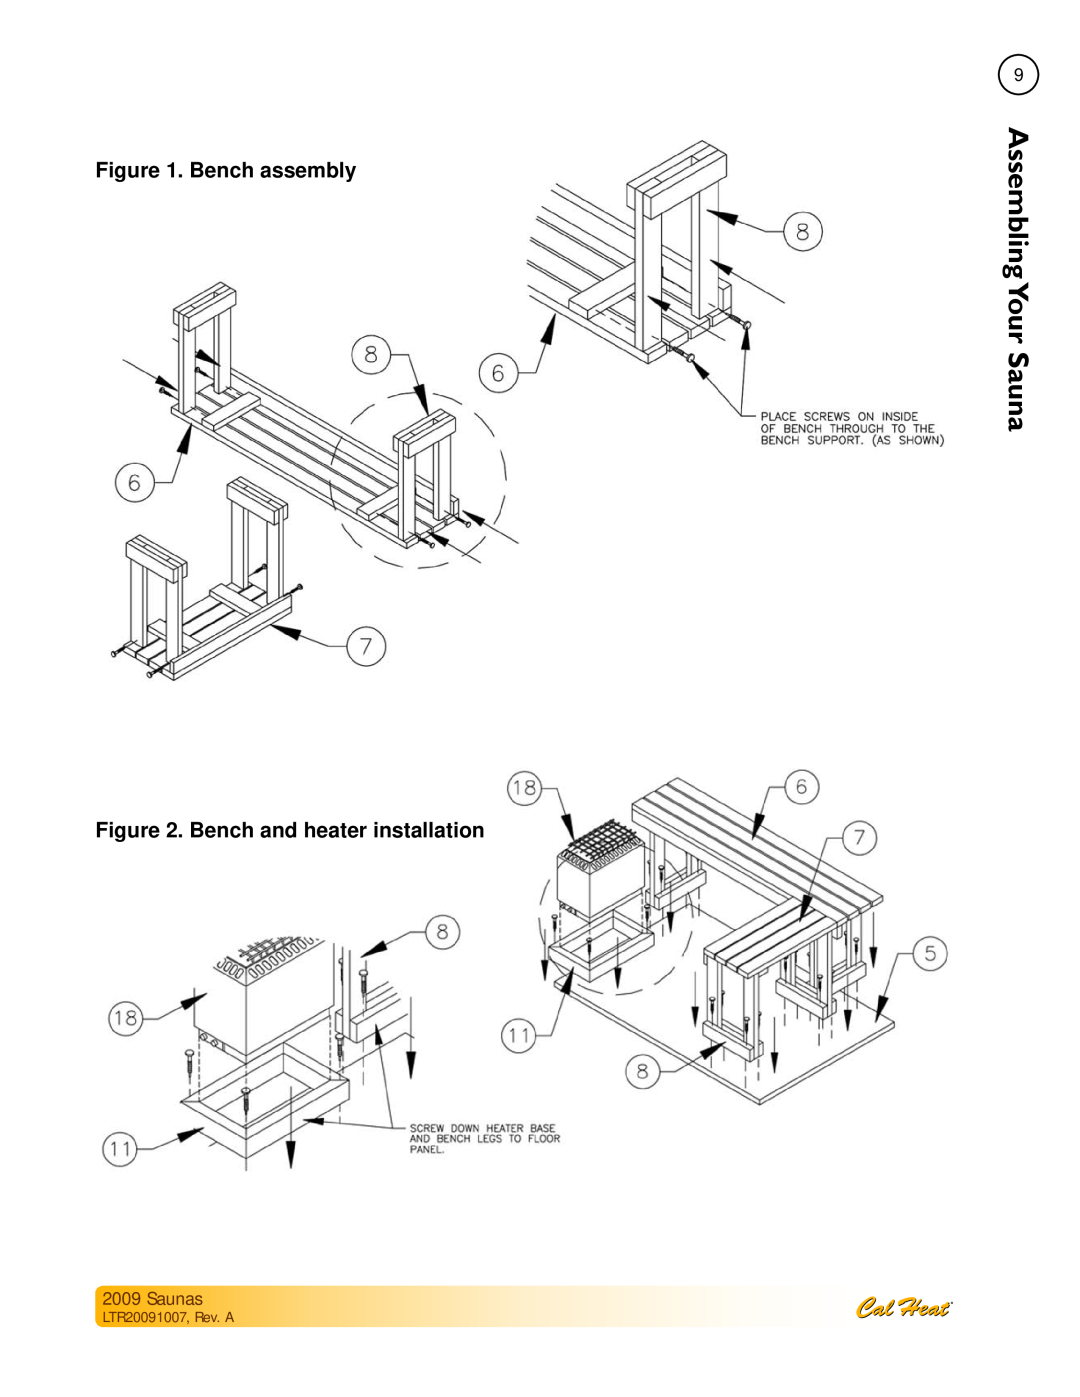 Cal Spas Saunas manual Bench assembly, Bench and heater installation, LTR20091007, Rev. A, AssemblingYour 